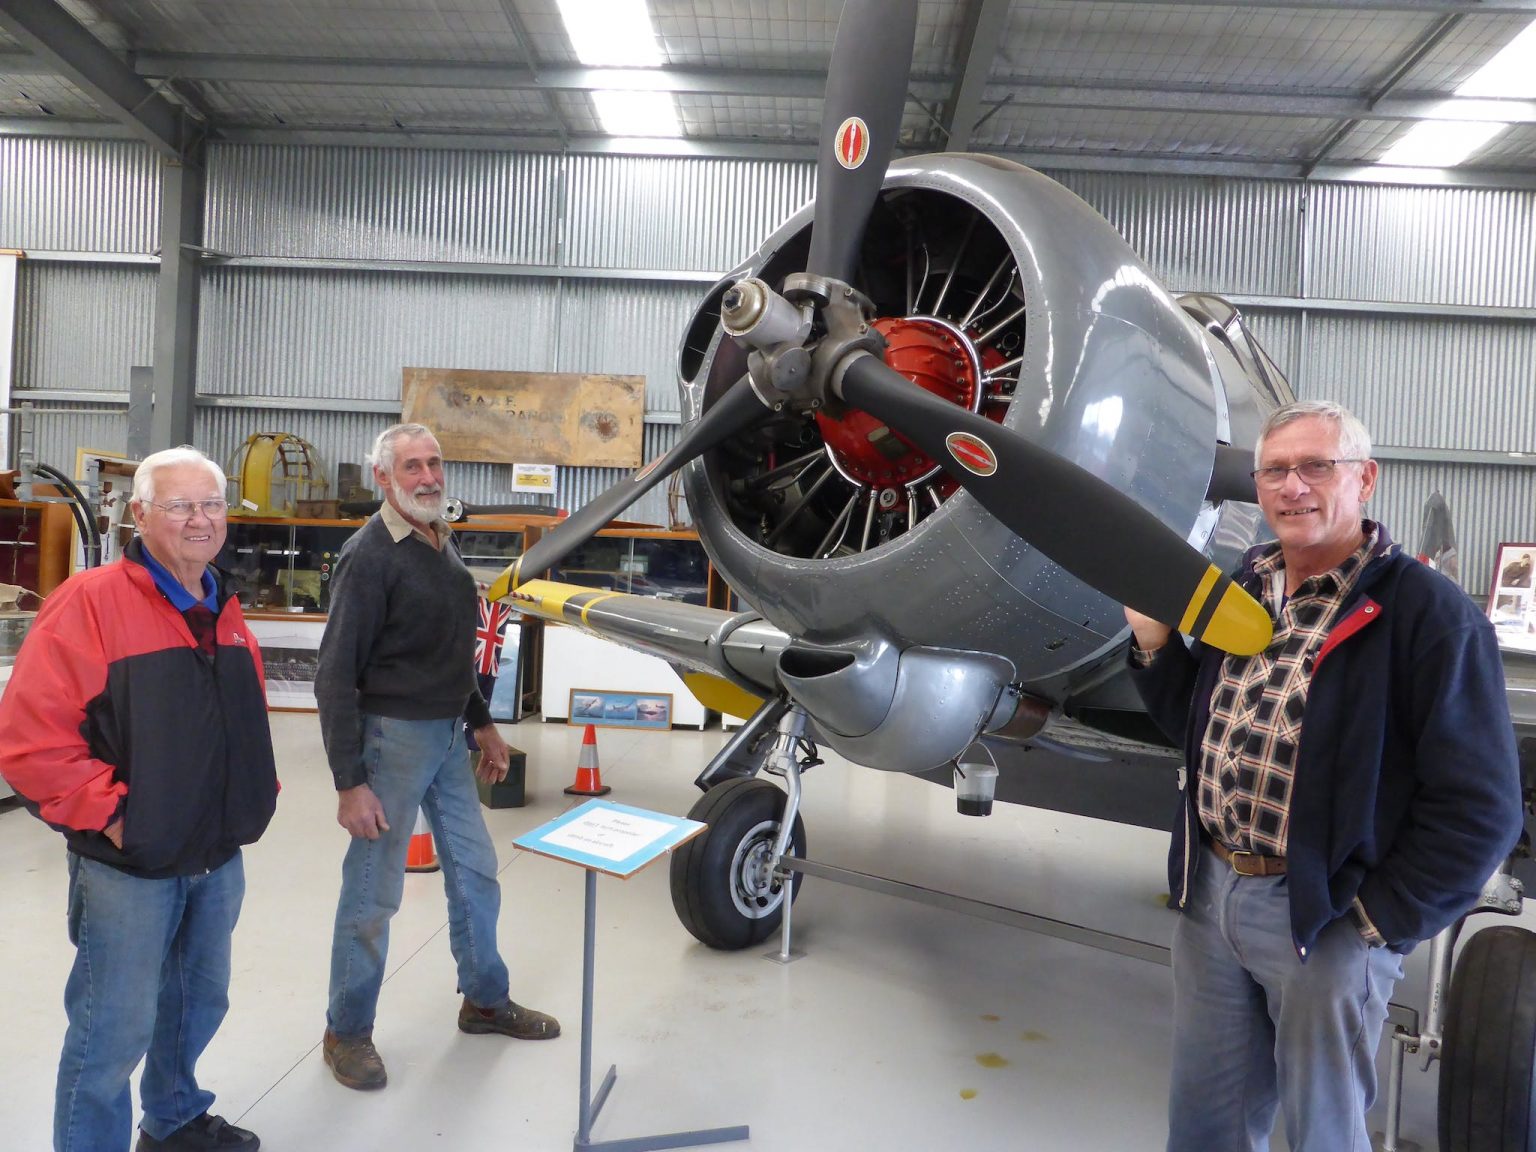 This Wirraway was meticulously restored by Borg Sorensen and bought by the local community.